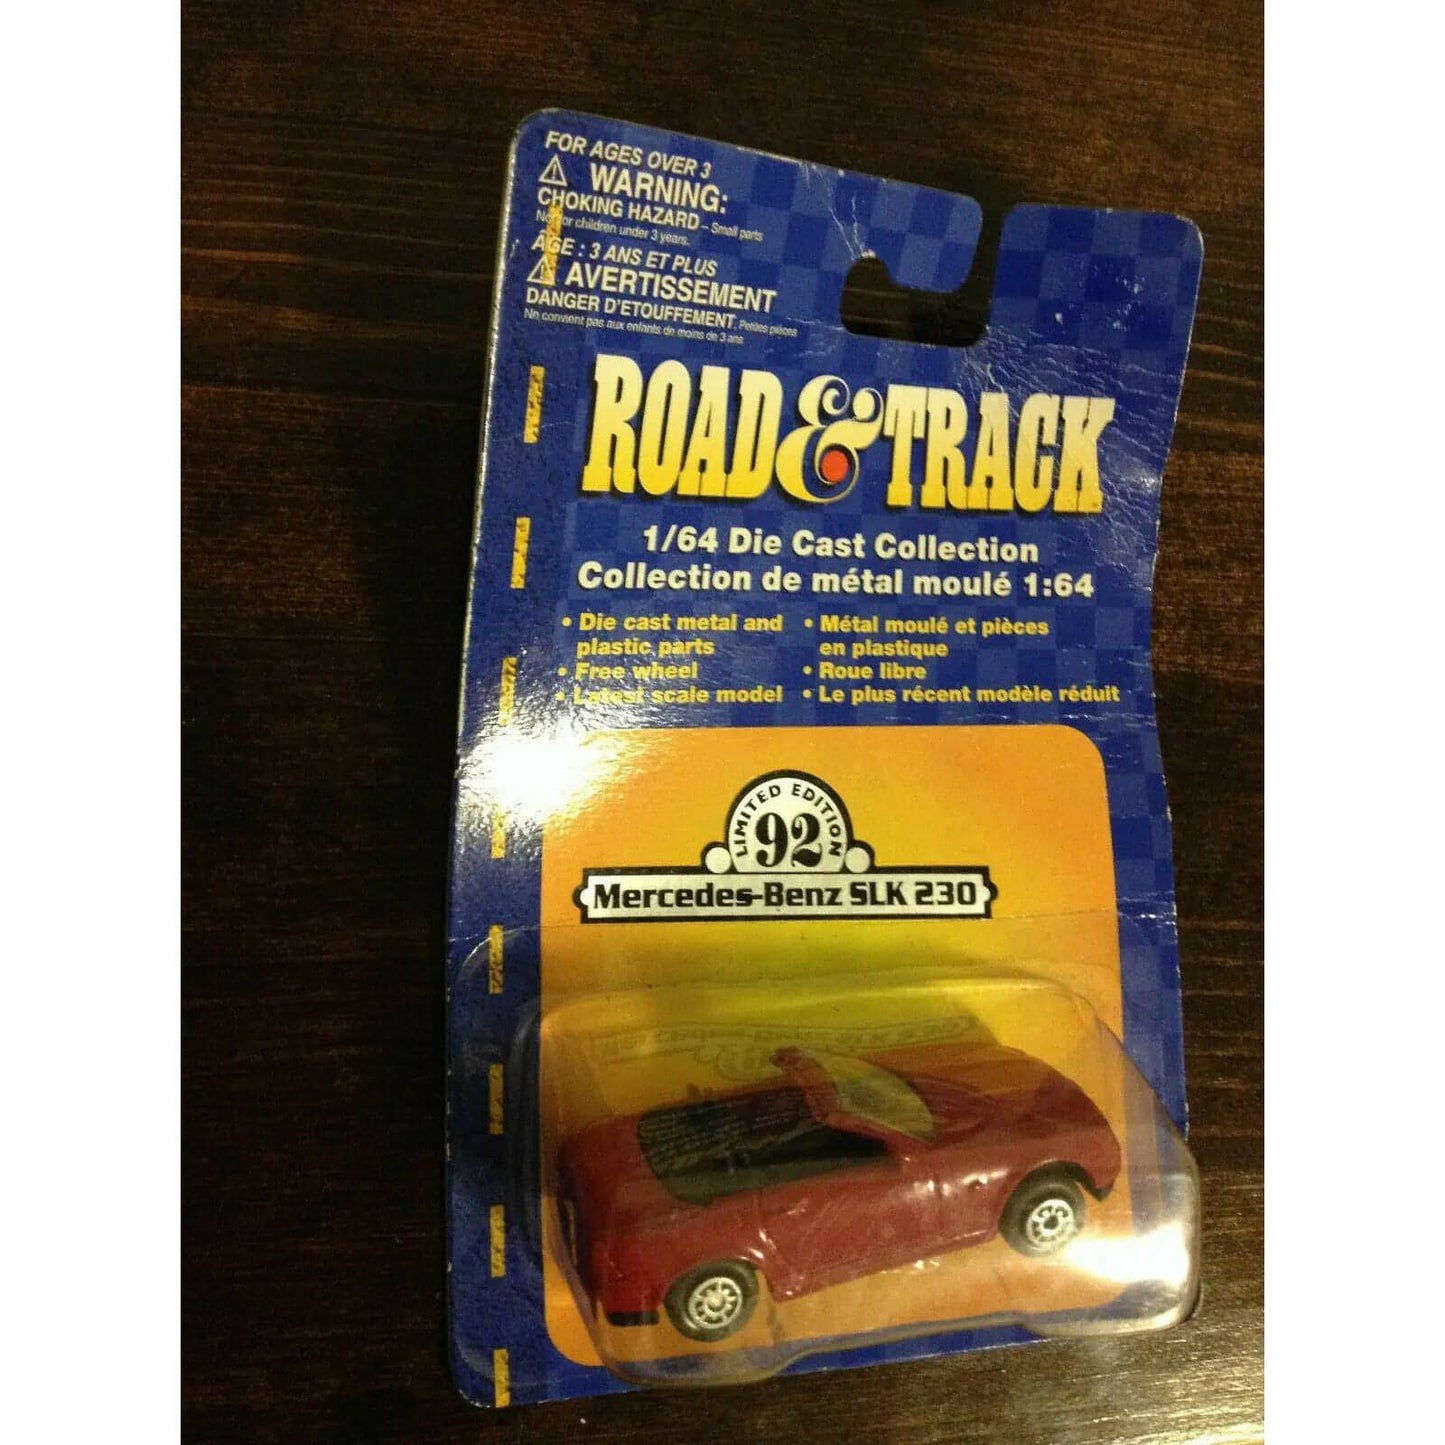 Road + Track: 1/64 Die Cast Coll 92 Limited Edition BooksCardsNBikes